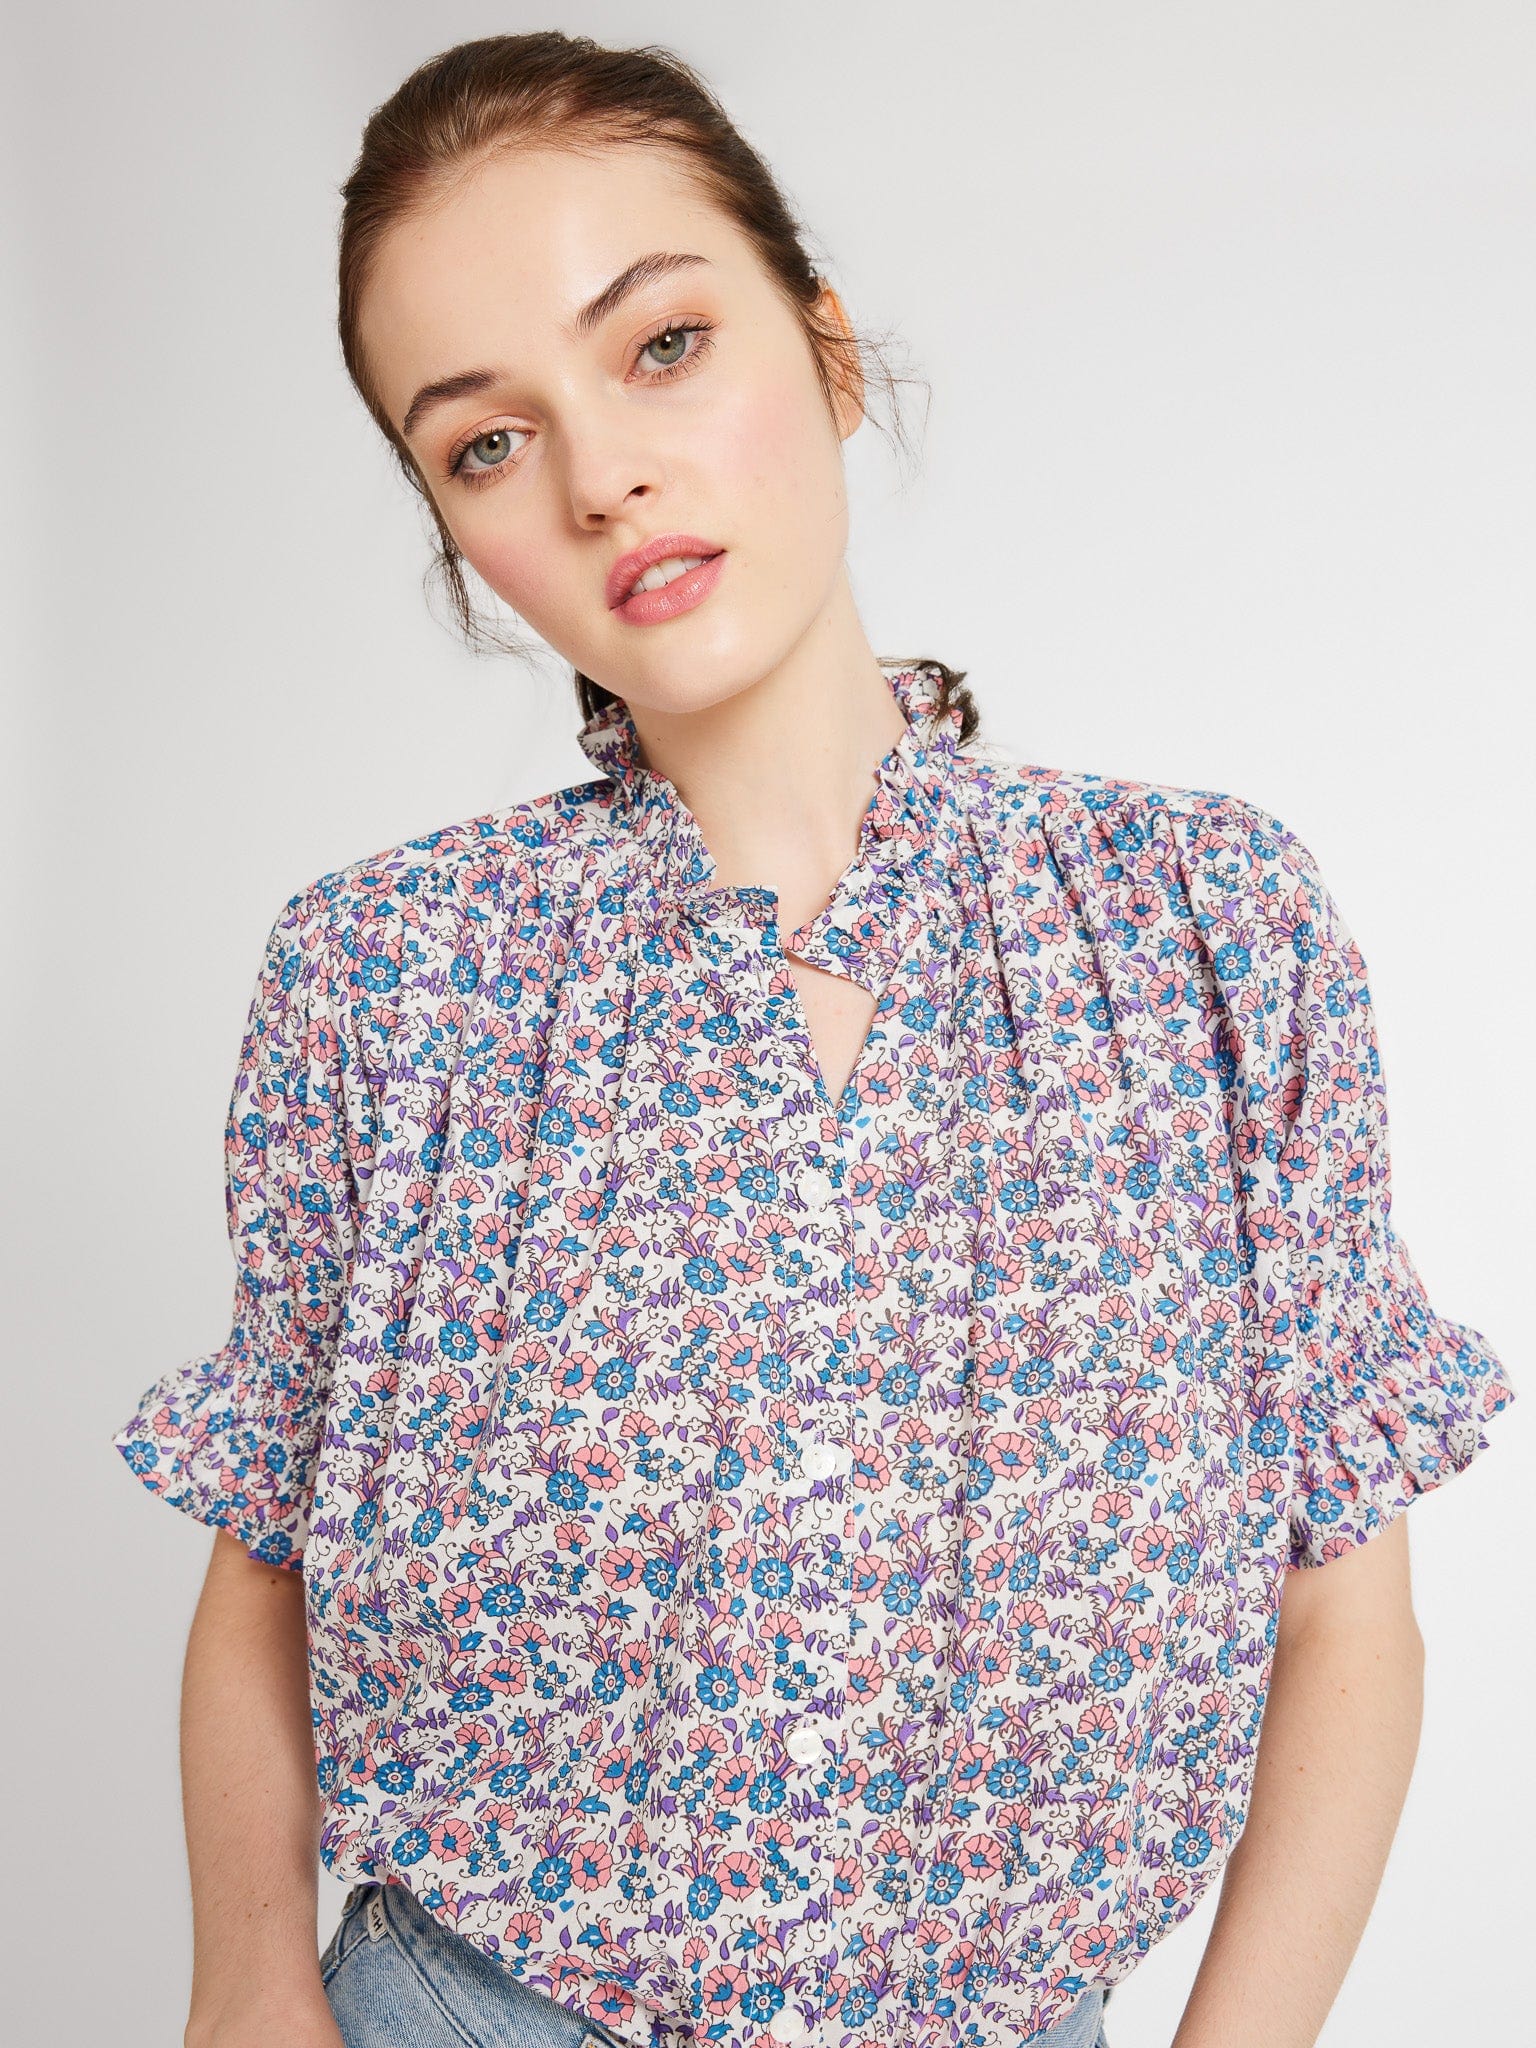 MILLE Clothing Marnie Top in Bluebell